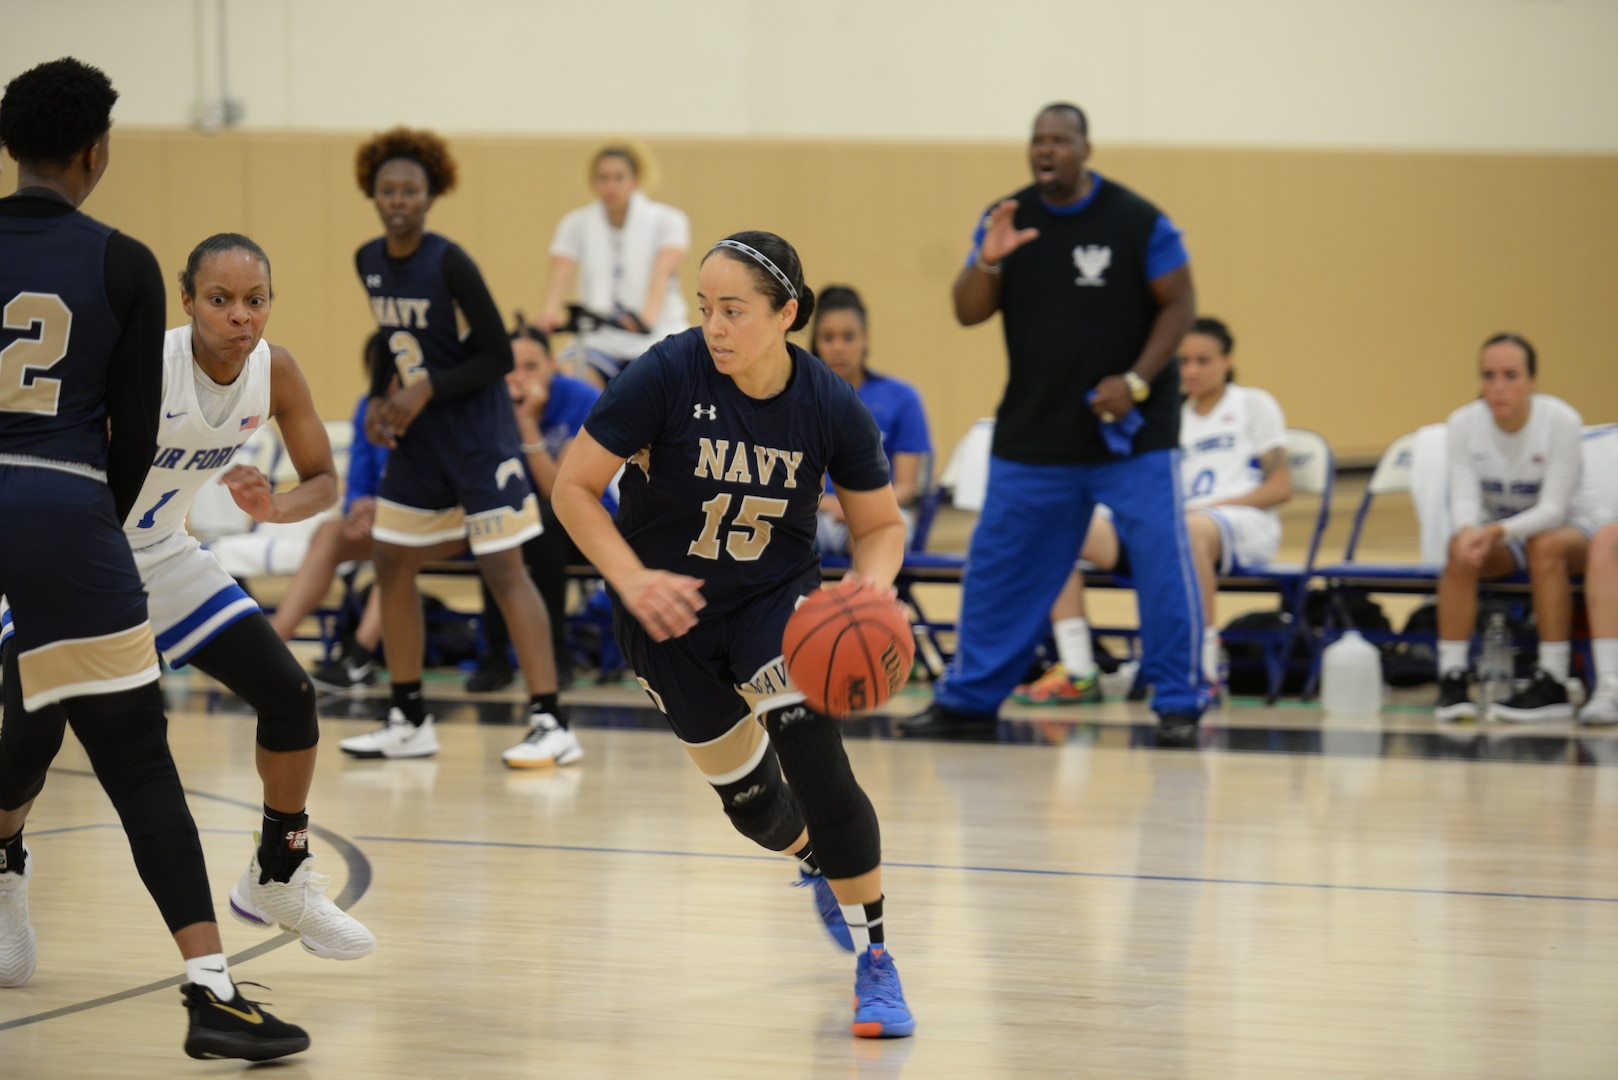 PO1 Christie Ayers of NSA Bahrain drives around defenders during the 2019 Armed Forces Women's Basketball Championship.  Elite U.S. military basketball players from around the world compete for dominance at Naval Station Mayport during the 2019 Armed Forces Men's and Women's Basketball Championship. Army, Marine Corps, Navy (with Coast Guard) and Air Force teams square off at the annual event which features double round-robin action, followed by championship and consolation games to crown the best players in the military. (U.S. Navy photo by Mass Communication Specialist 1st Class Gulianna Dunn/RELEASED)